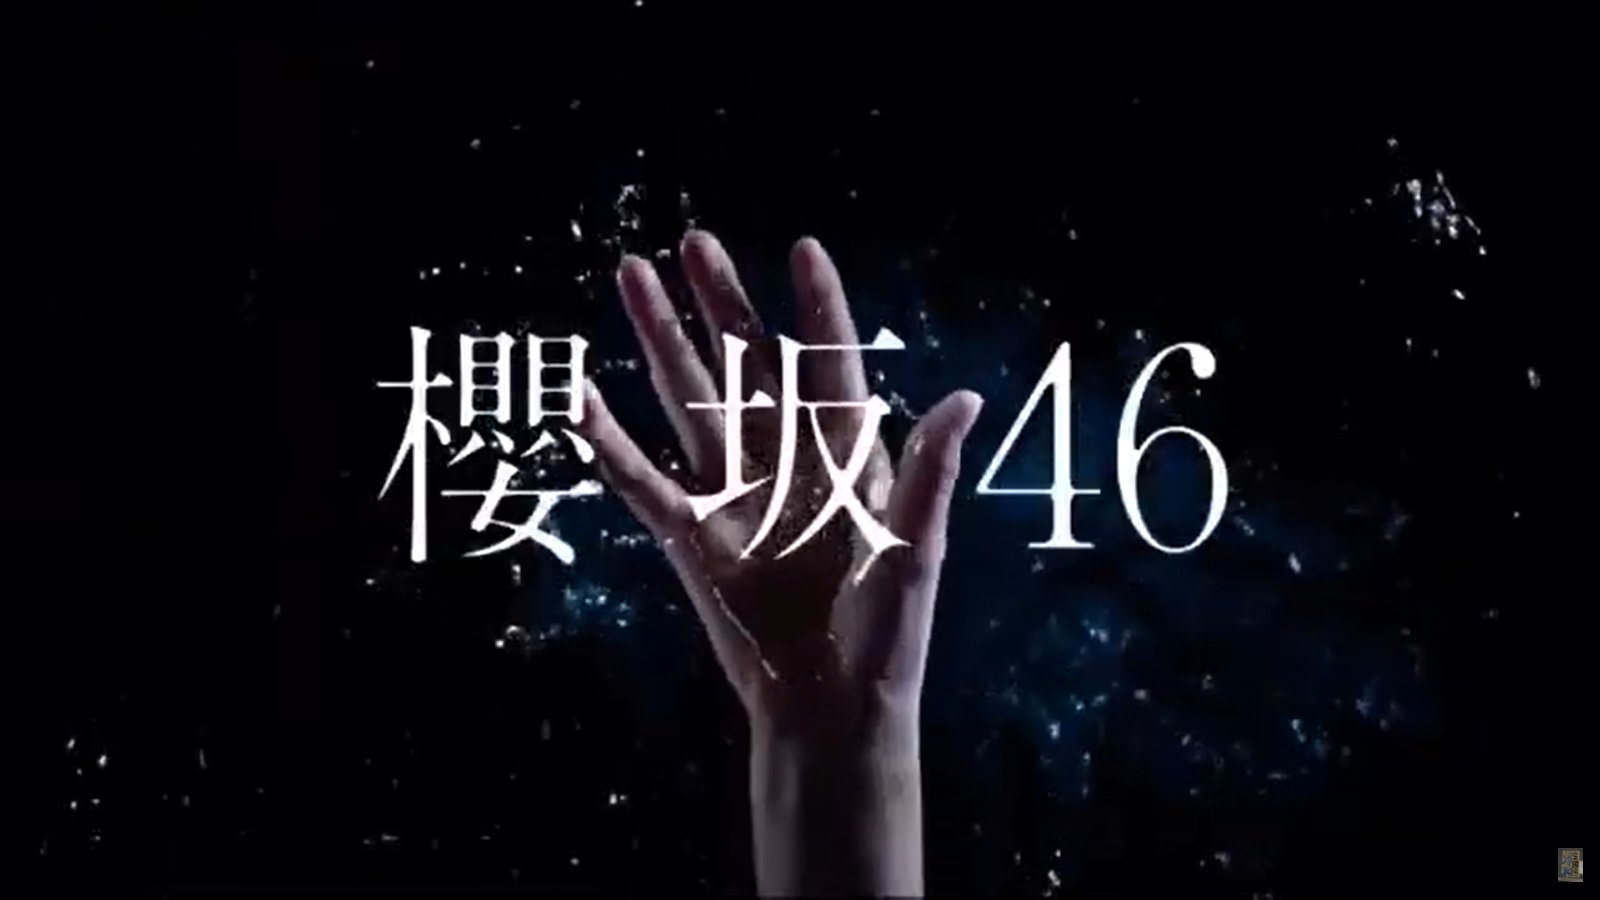 J Pop Project News Revealed That Their New Name Will Be Sakurazaka46. The Announcement Was Made On A Screen At The Shibuya Scramble Crossing And In A TV Commercial (pic)